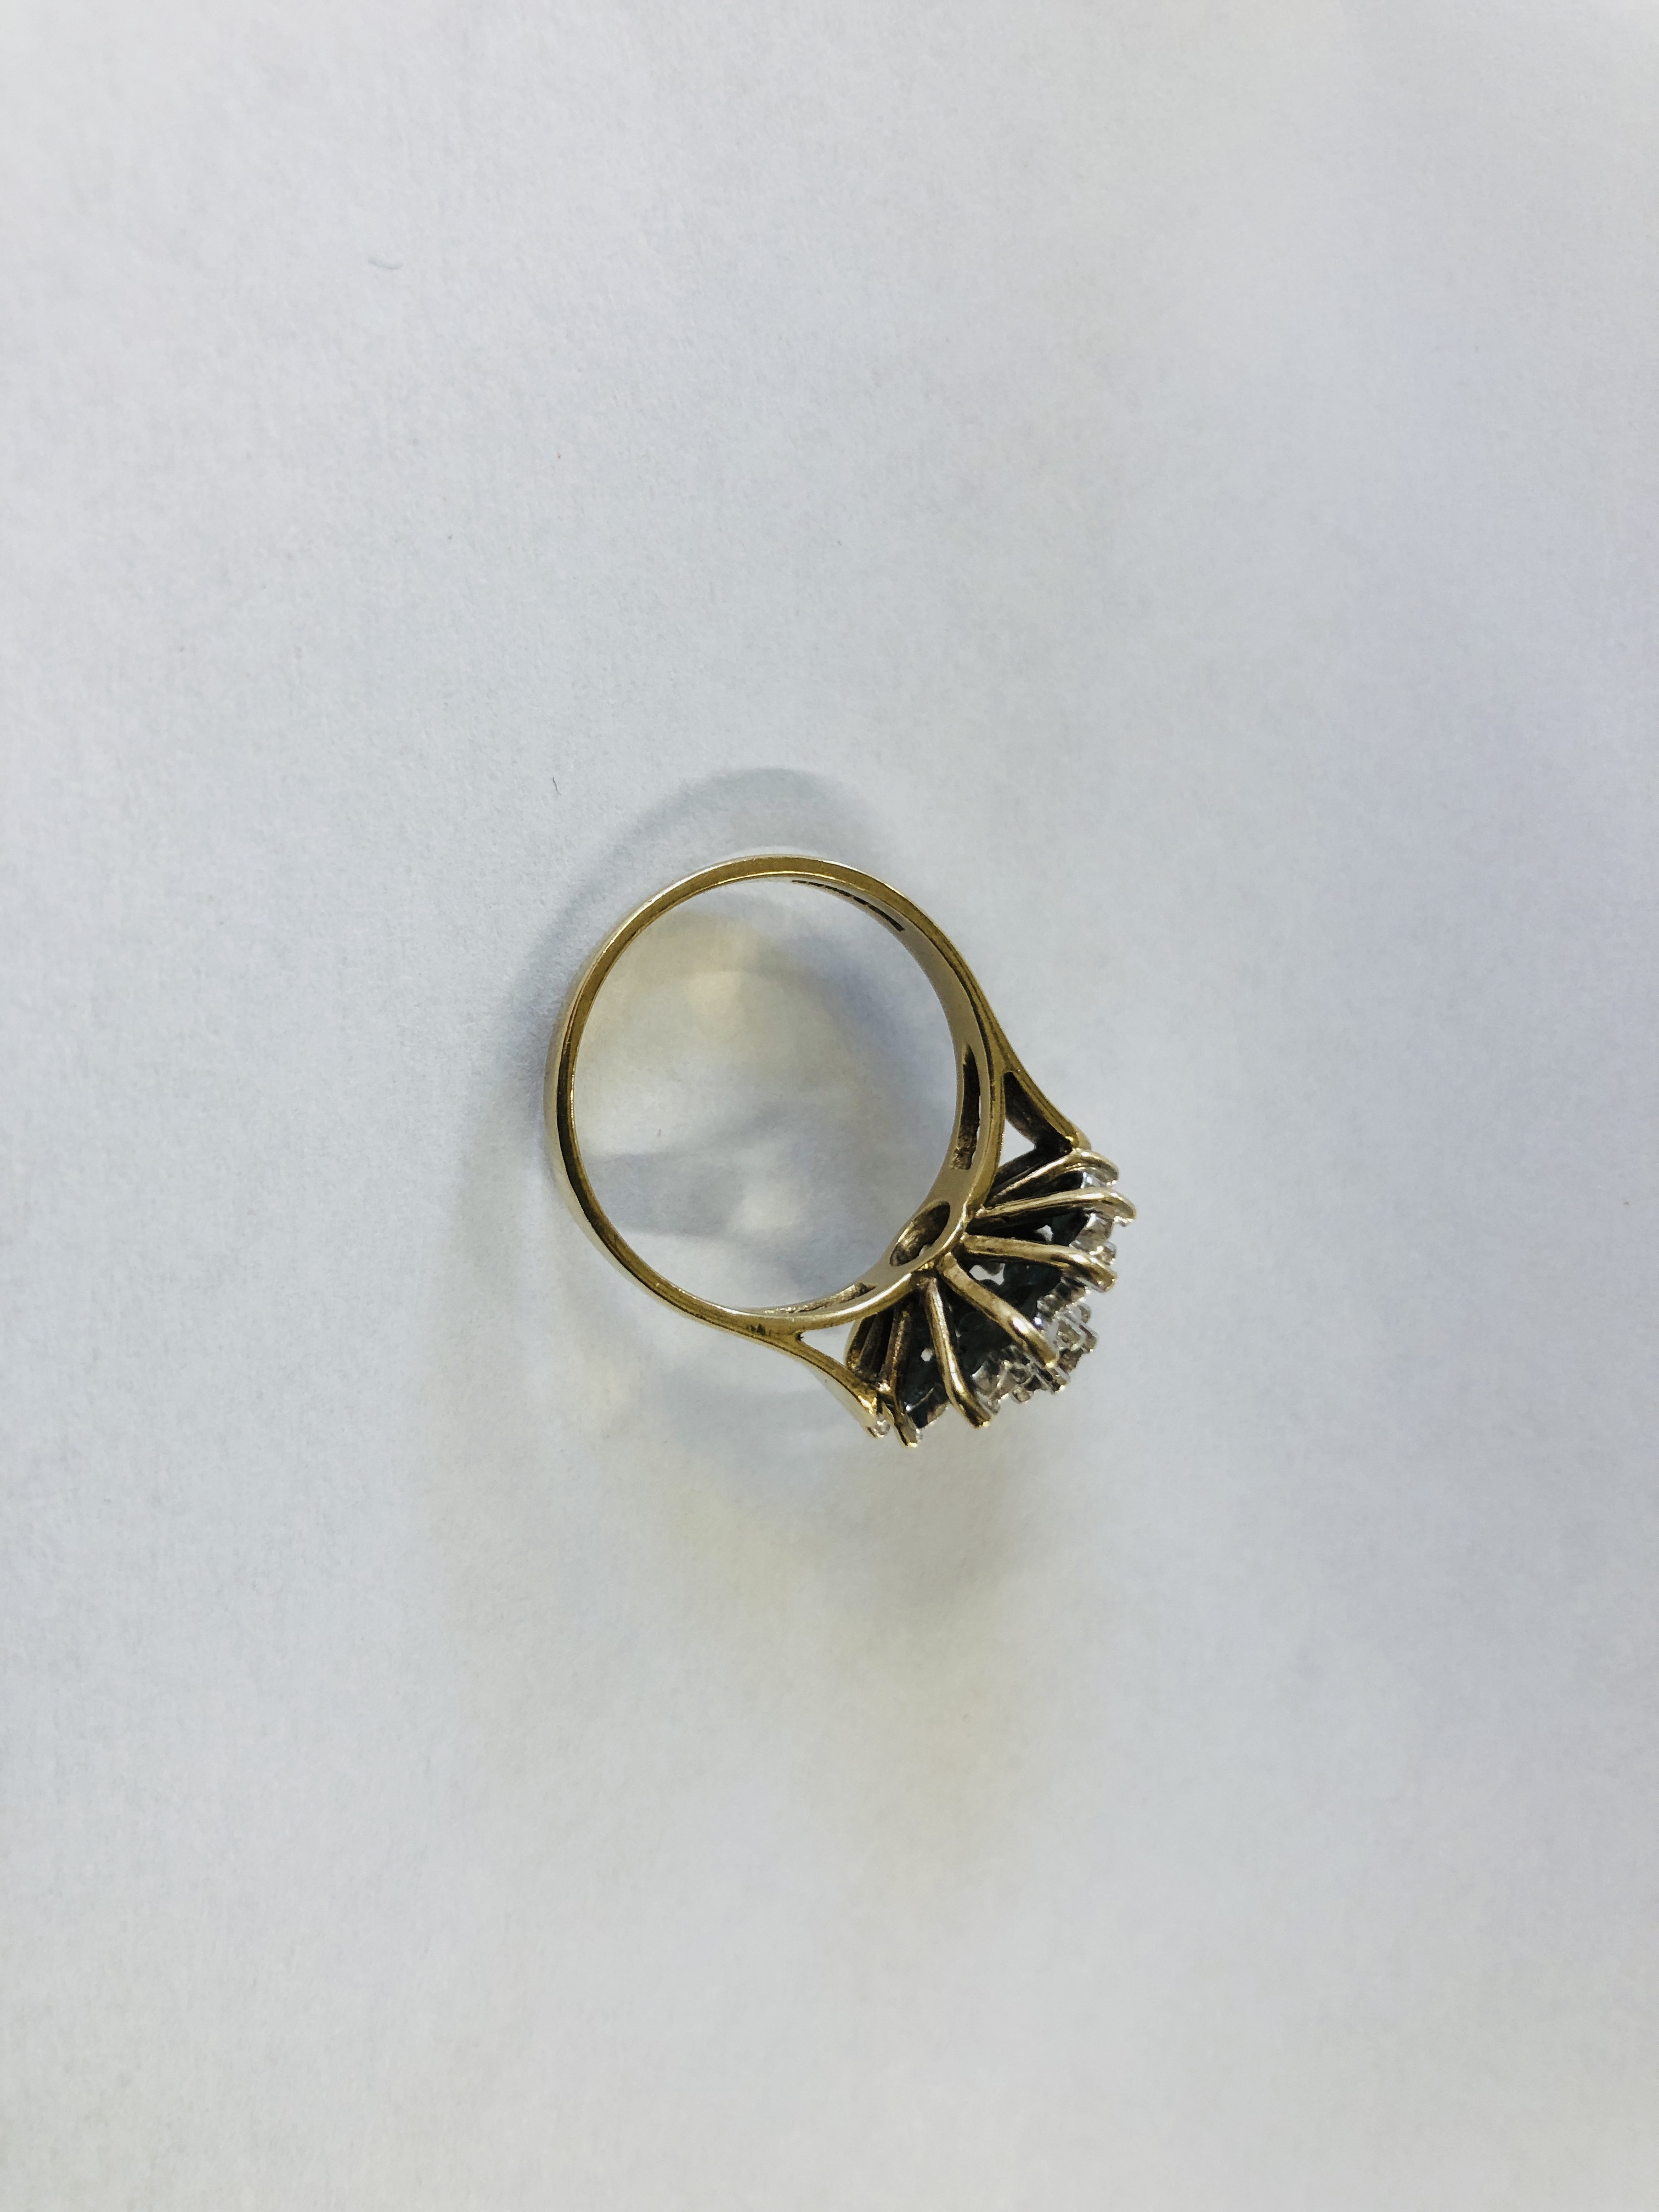 A 9CT GOLD DIAMOND CLUSTER RING - Image 6 of 8